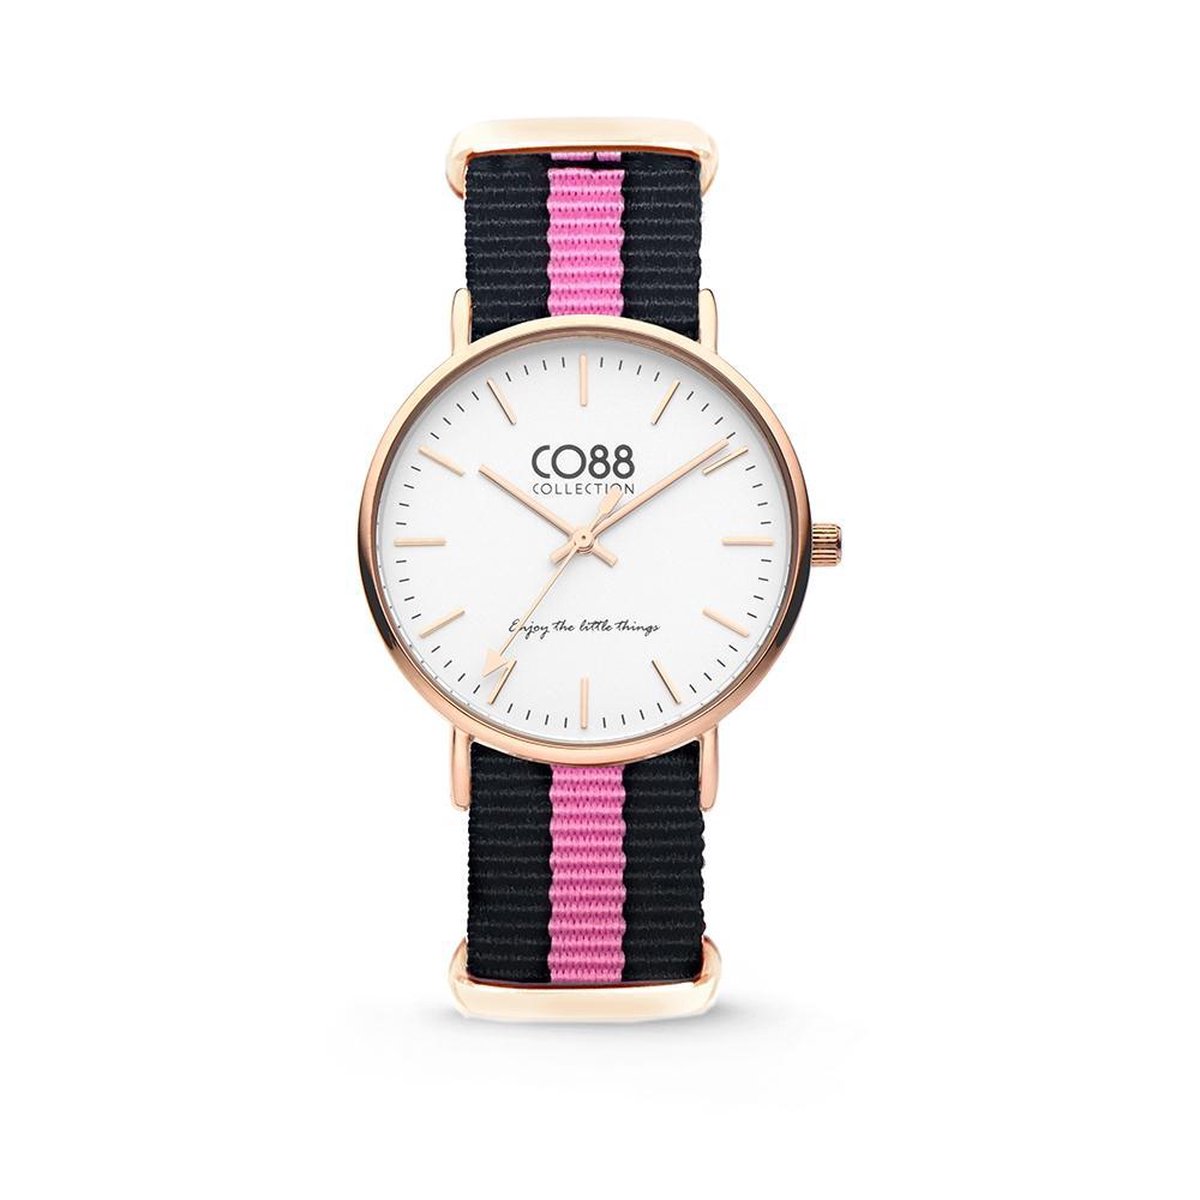 CO88 Collection Watches 8CW 10033 Horloge - Nato Band - Ø 36 mm - Zwart - Roze